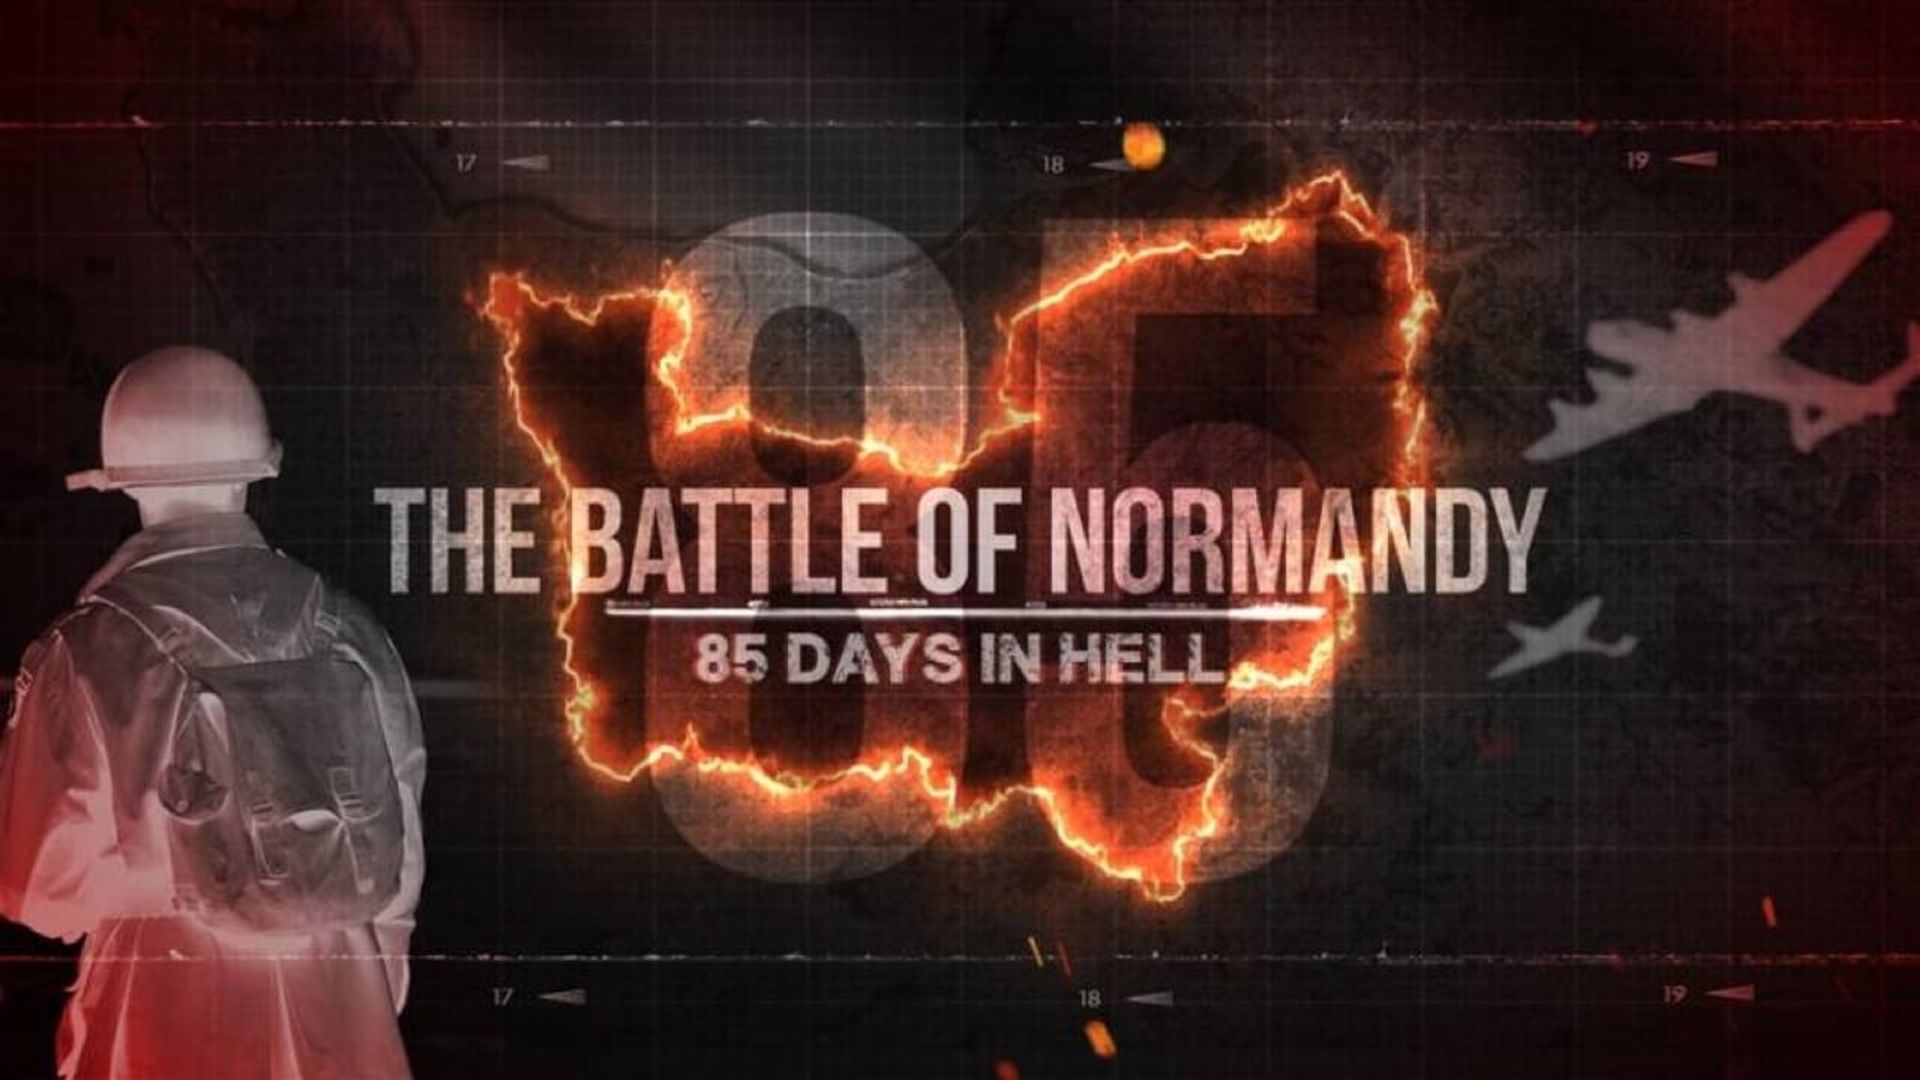 The Battle of Normandy: 85 Days in Hell background